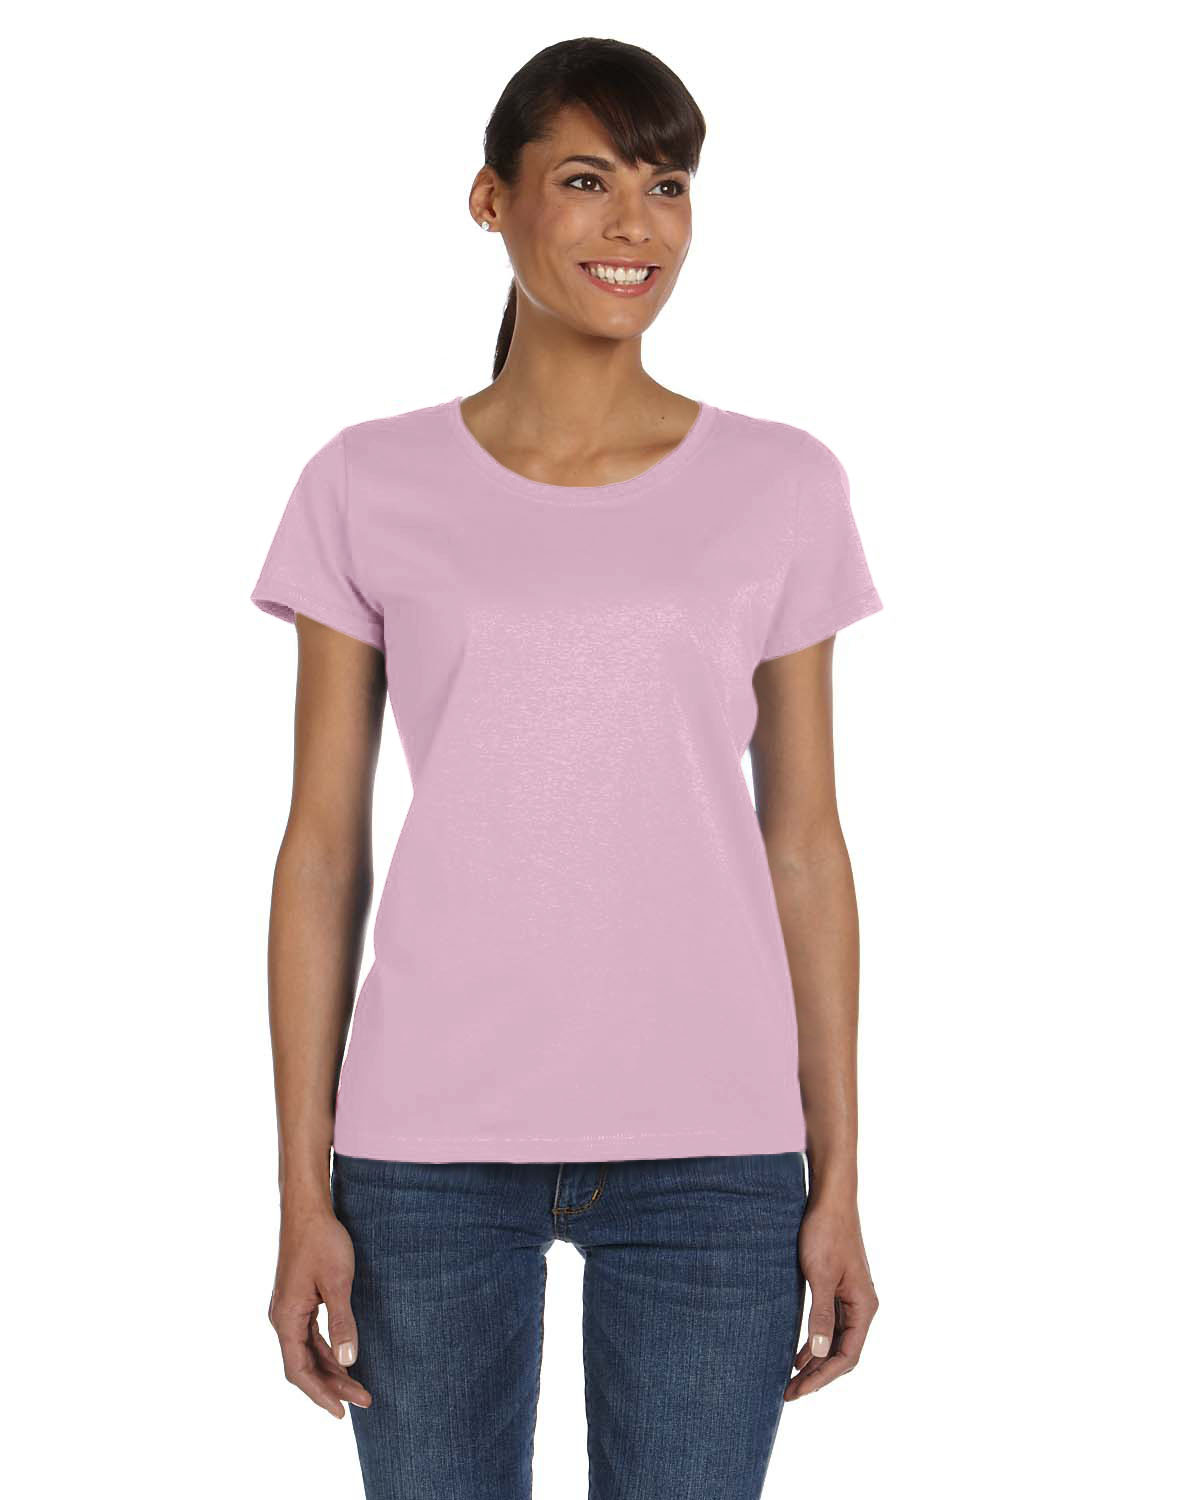 Gildan G64VL Ladies' SoftStyle® Fitted V-Neck T-Shirt